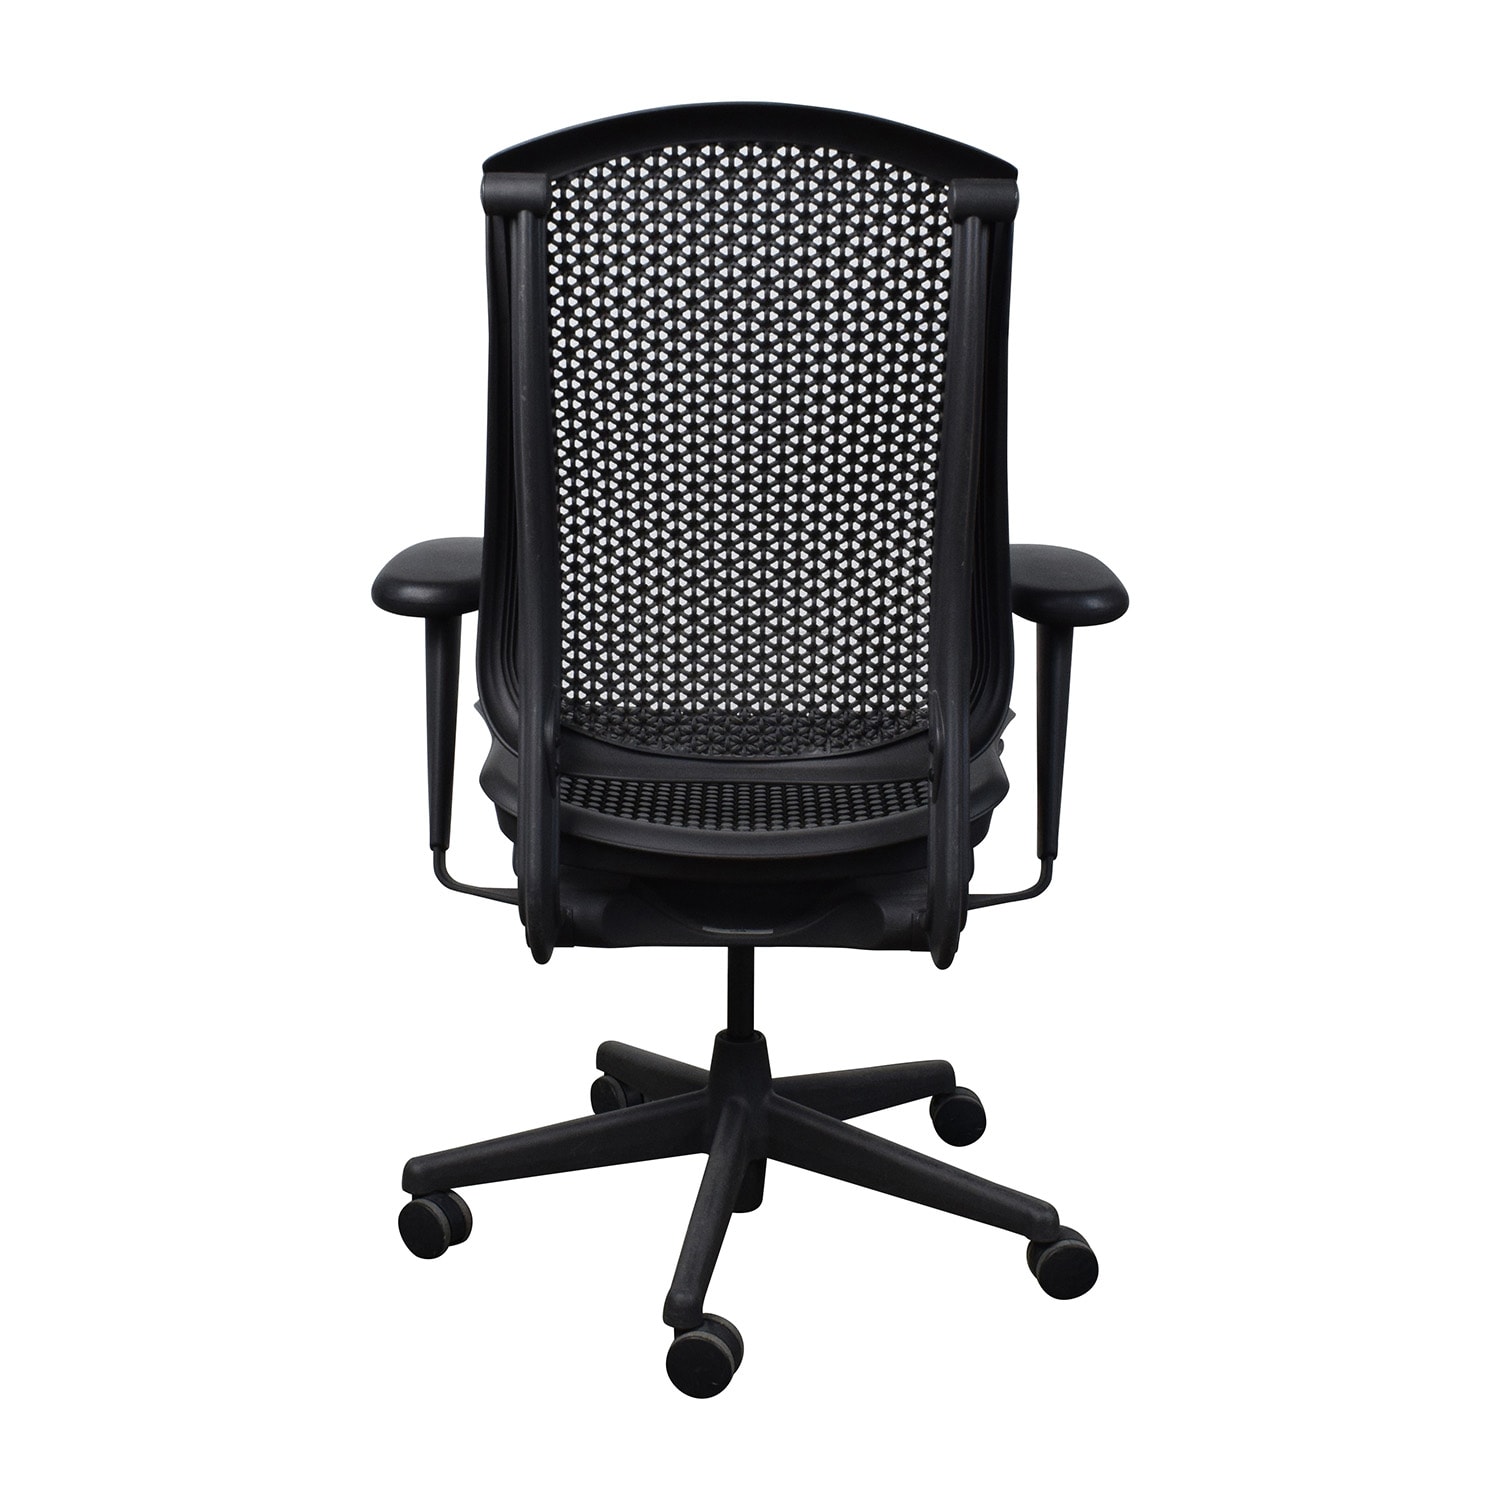 https://res.cloudinary.com/dkqtxtobb/image/upload/f_auto,q_auto:best,w_1500/product-assets/20579/herman-miller/chairs/home-office-chairs/second-hand-herman-miller-areo-office-chair.jpeg